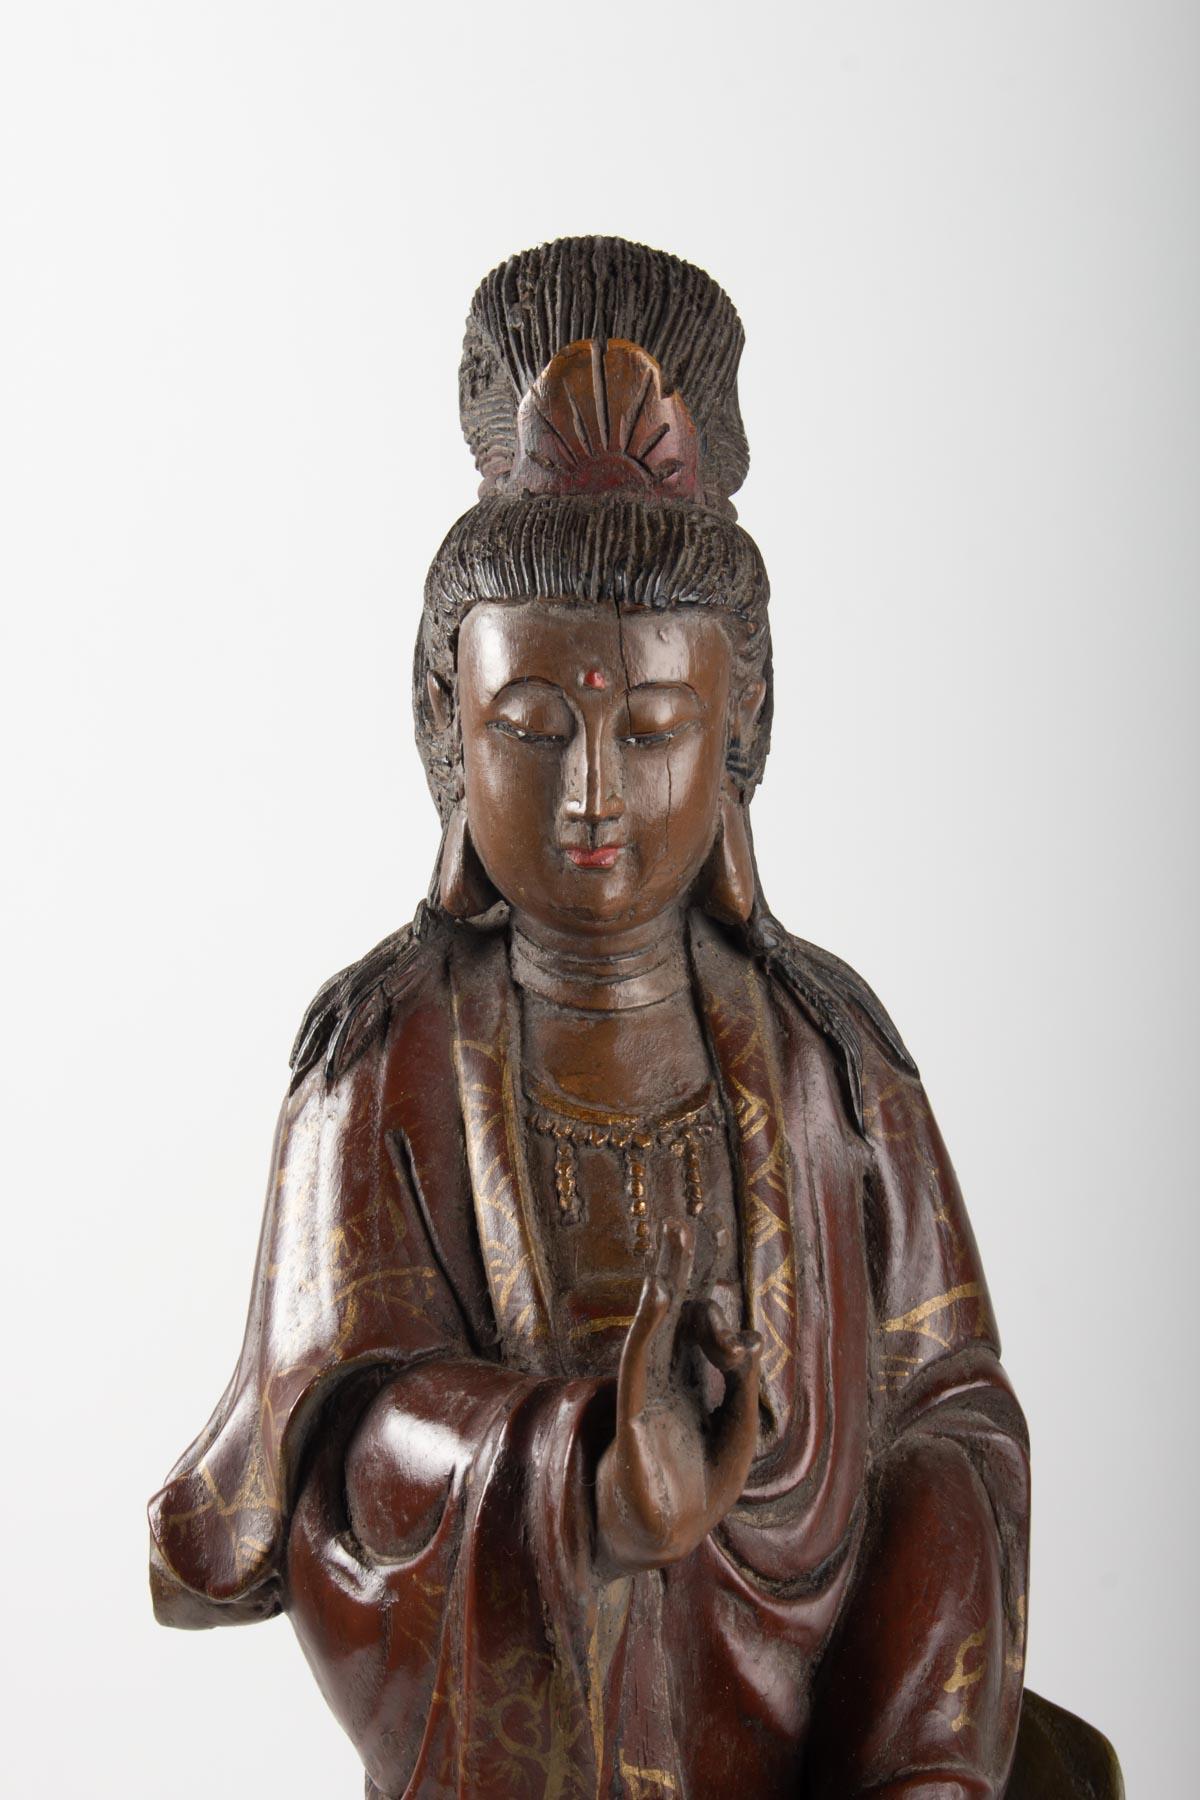 Guanyin in carved wood and polichrome, China, early 20th century, Asian art
Measures: H 56cm, W 16cm, W 15cm.